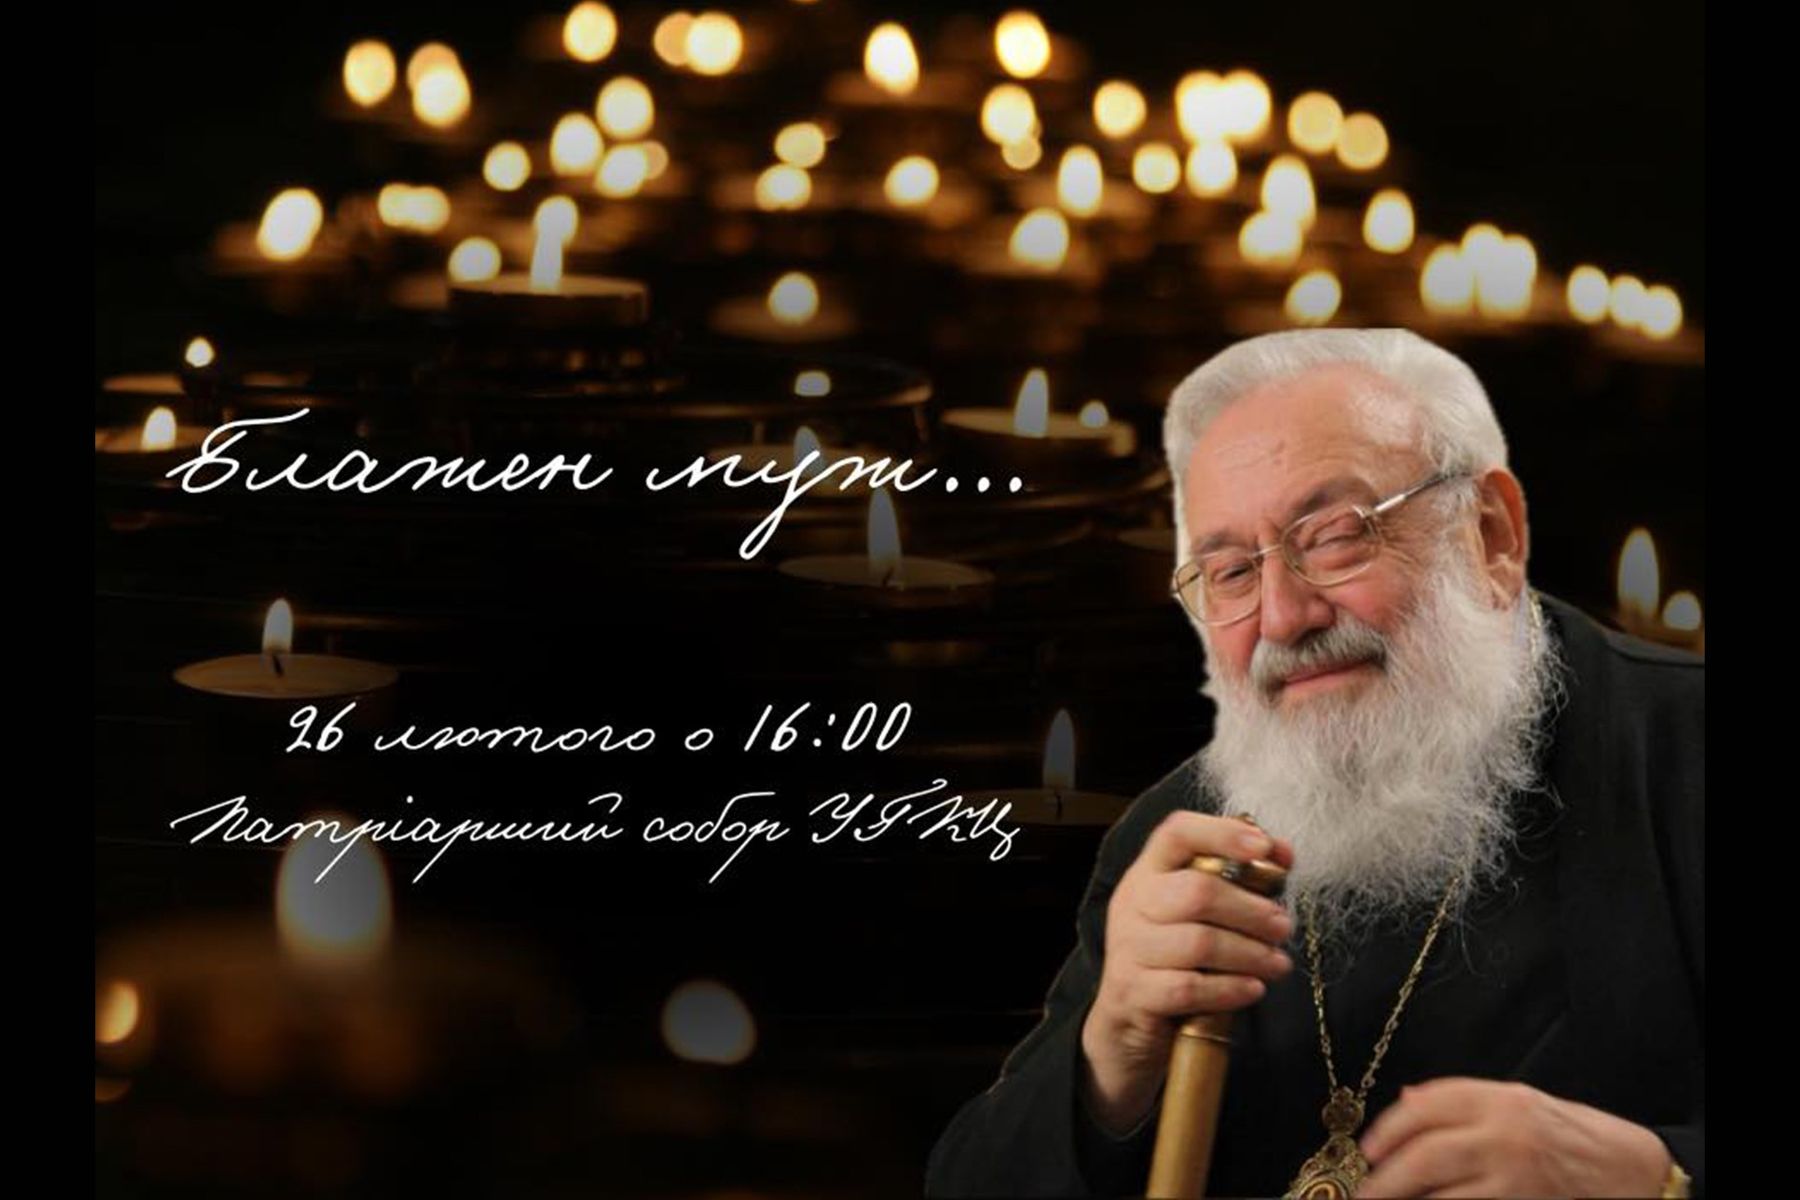 Prayer to Commemorate Patriarch Lubomyr Husar Planned in Kyiv